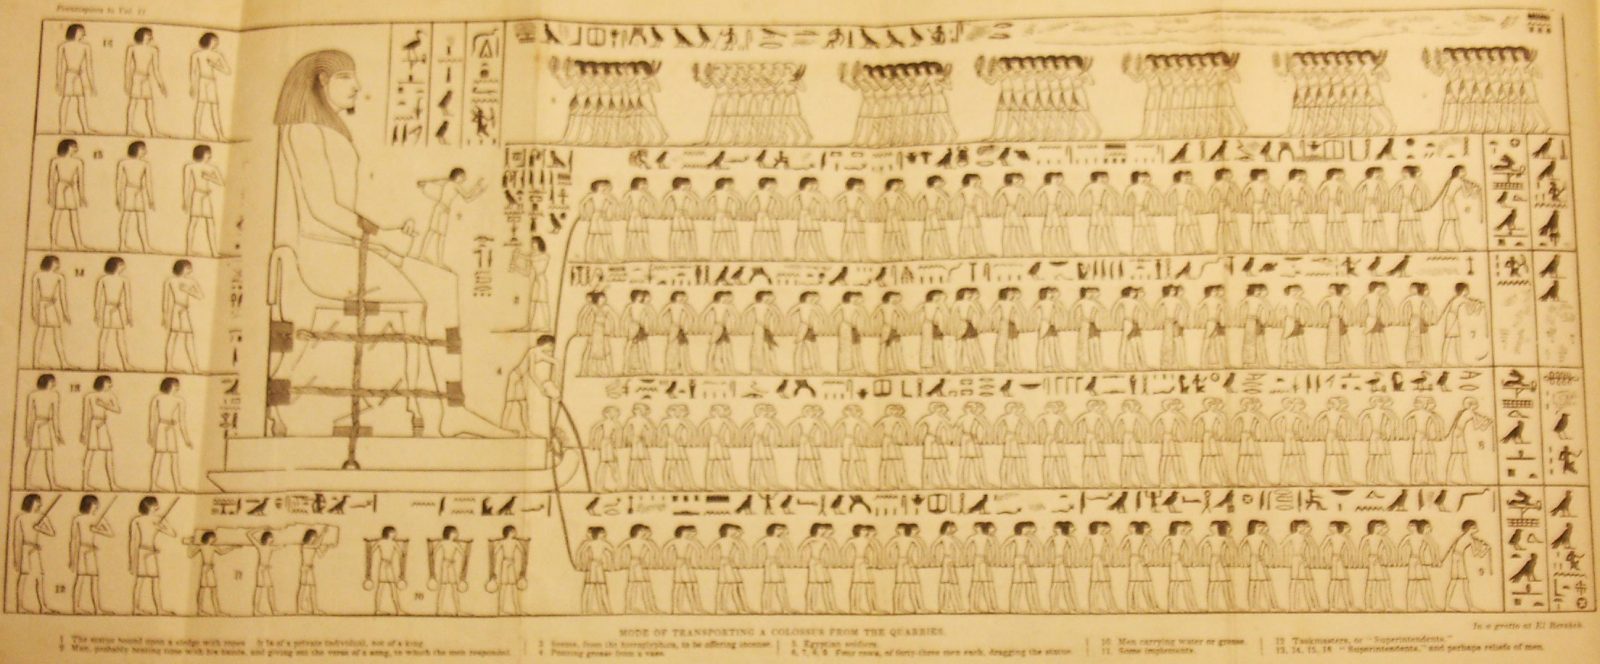 From the wall of the tomb of Djehutihotep